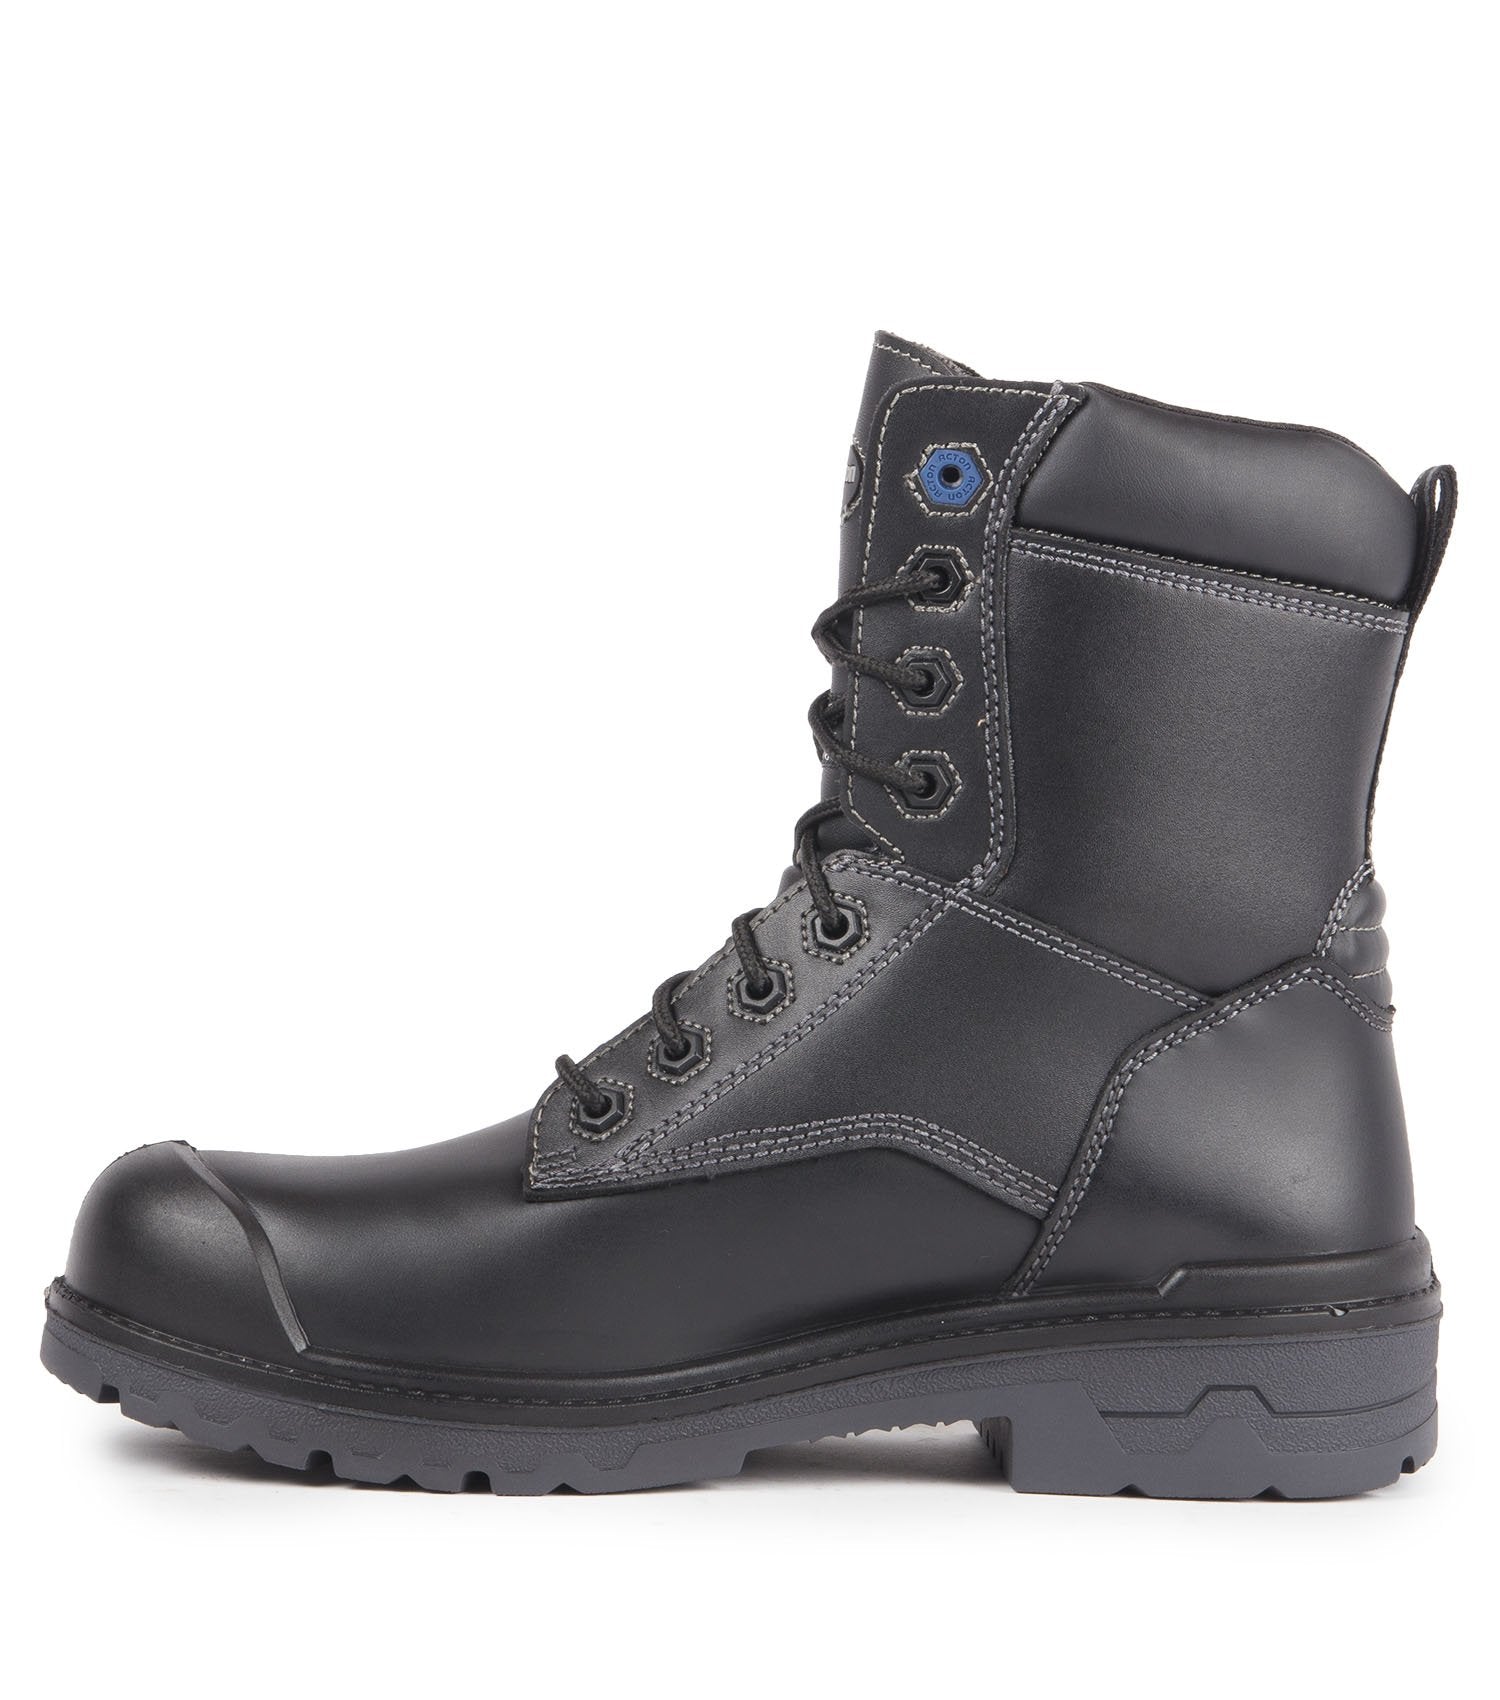 Acton Progum 8" Waterproof Leather Work Boots | Black | Size 7 to Size 17 Work Boots - Cleanflow